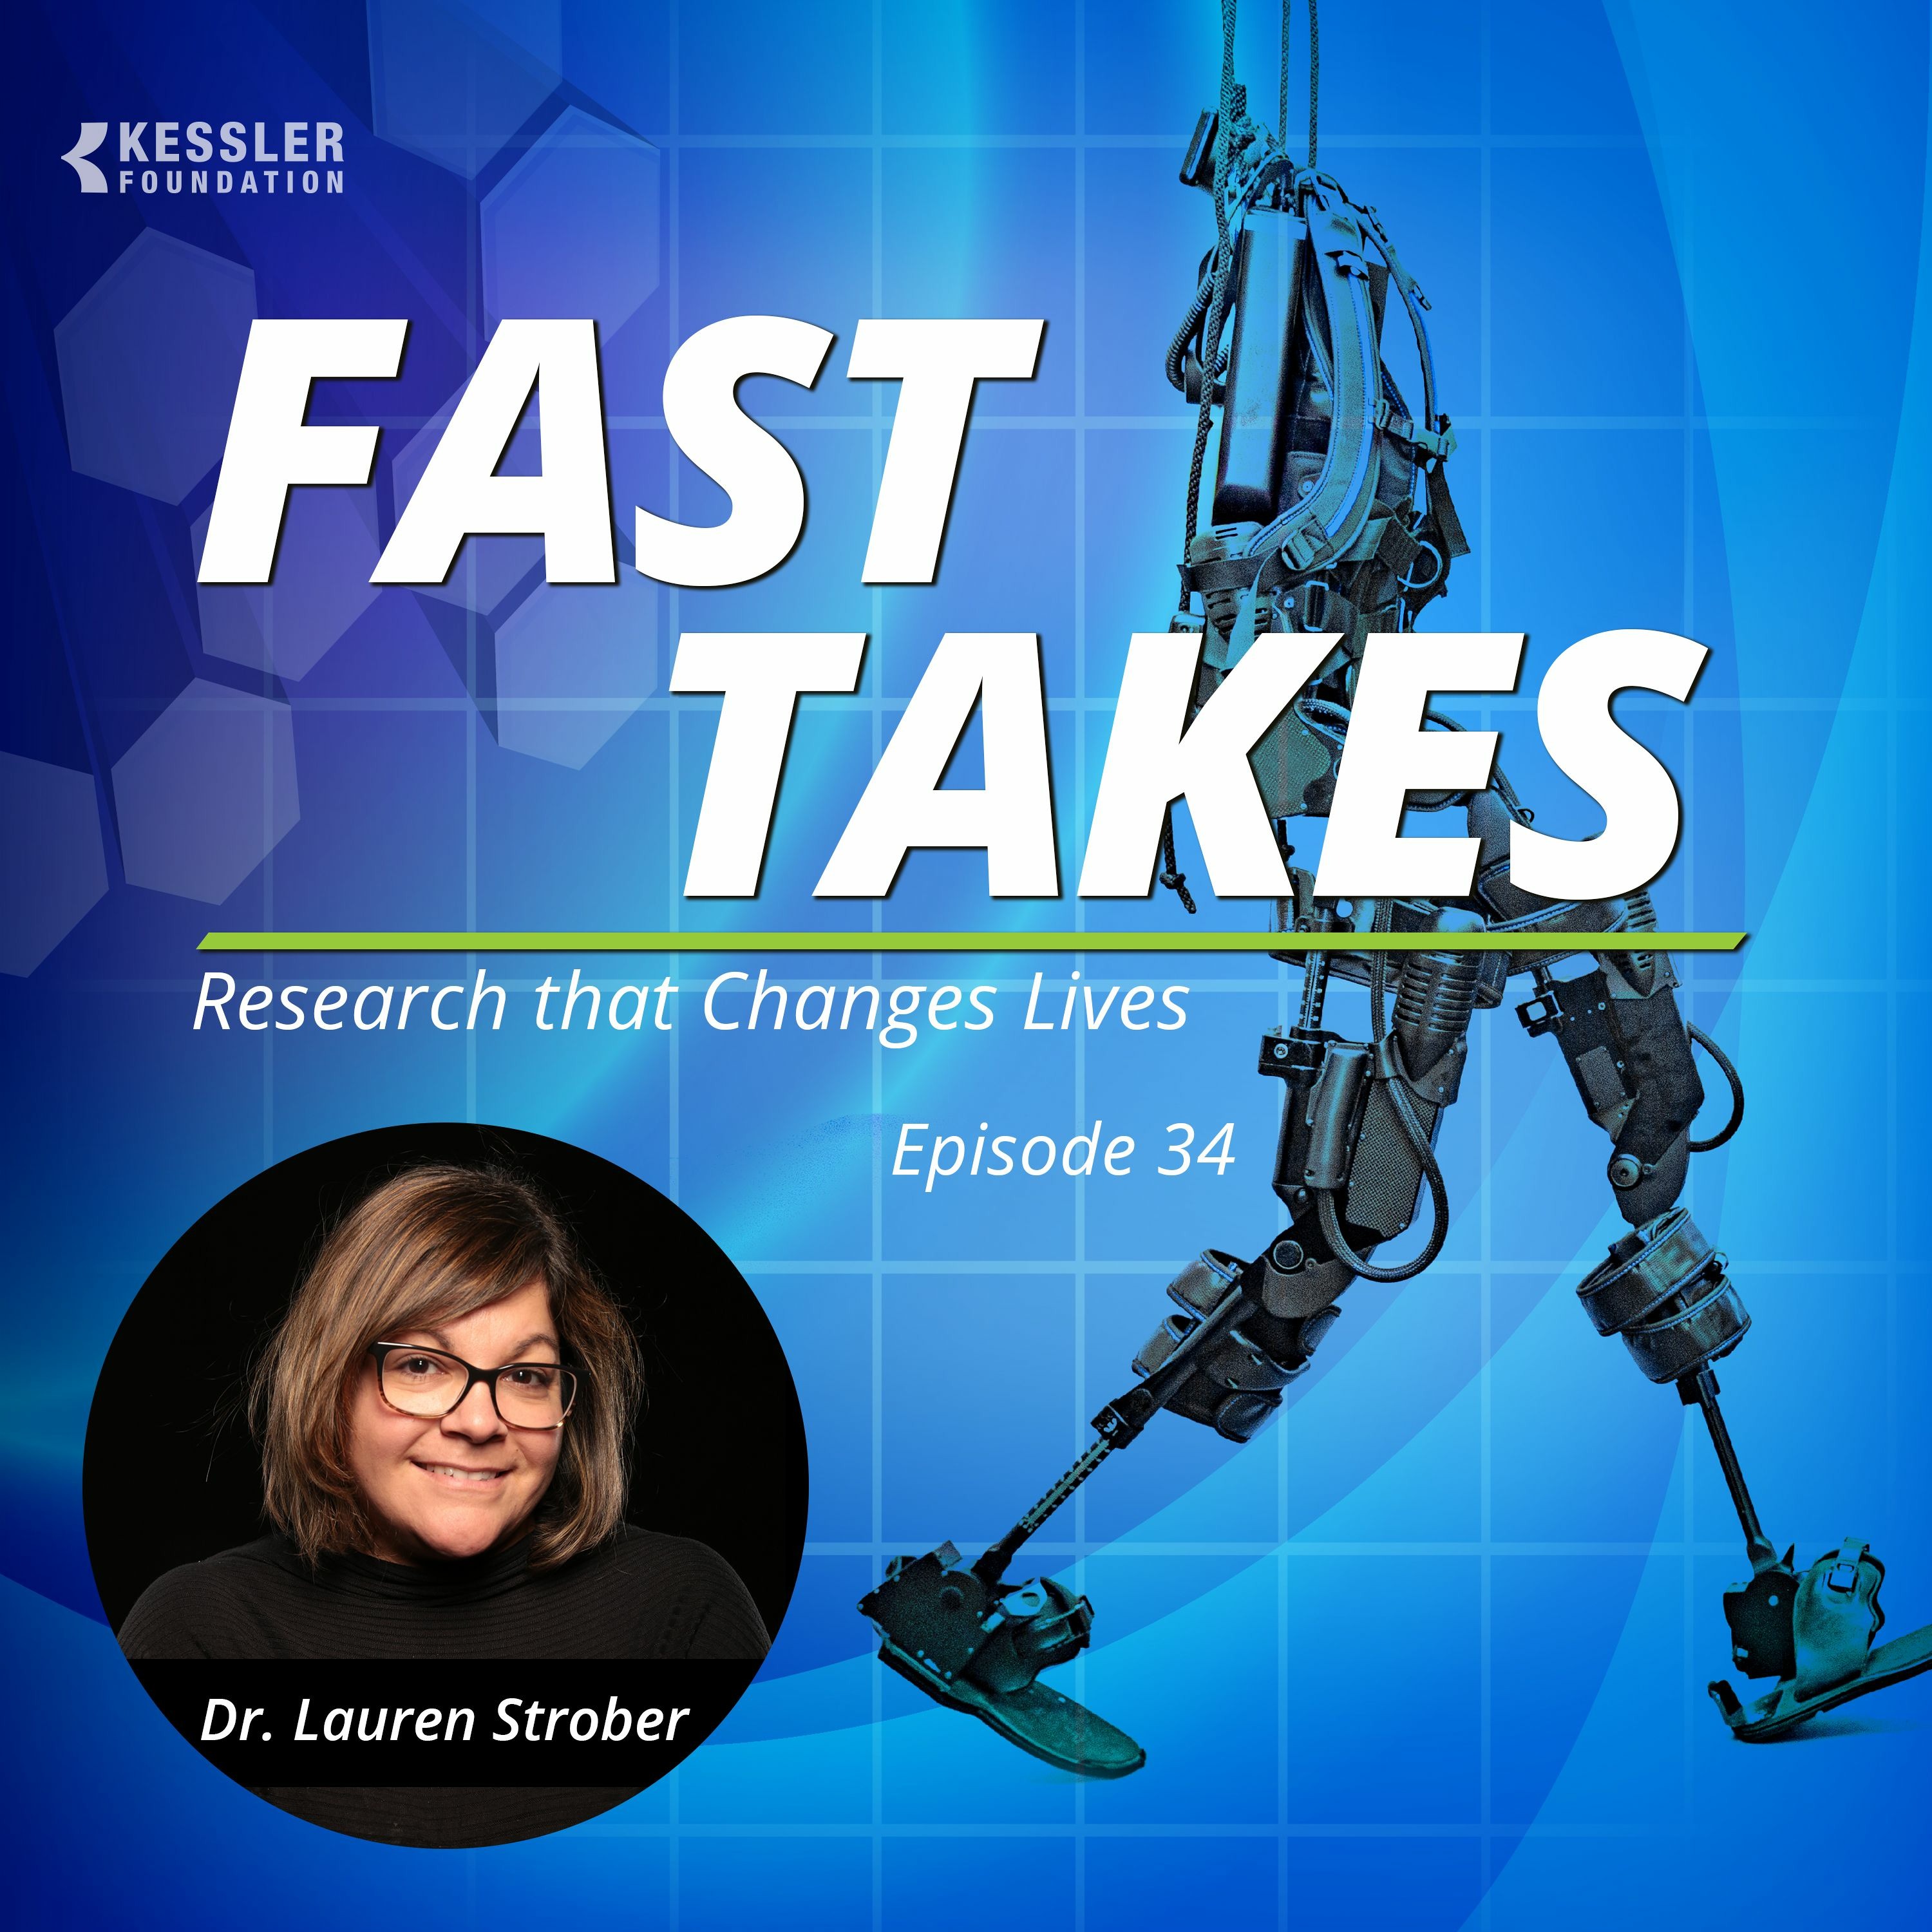 Curiosity in science launches Dr. Lauren Strober on the path to studying neuropsychology-Ep34